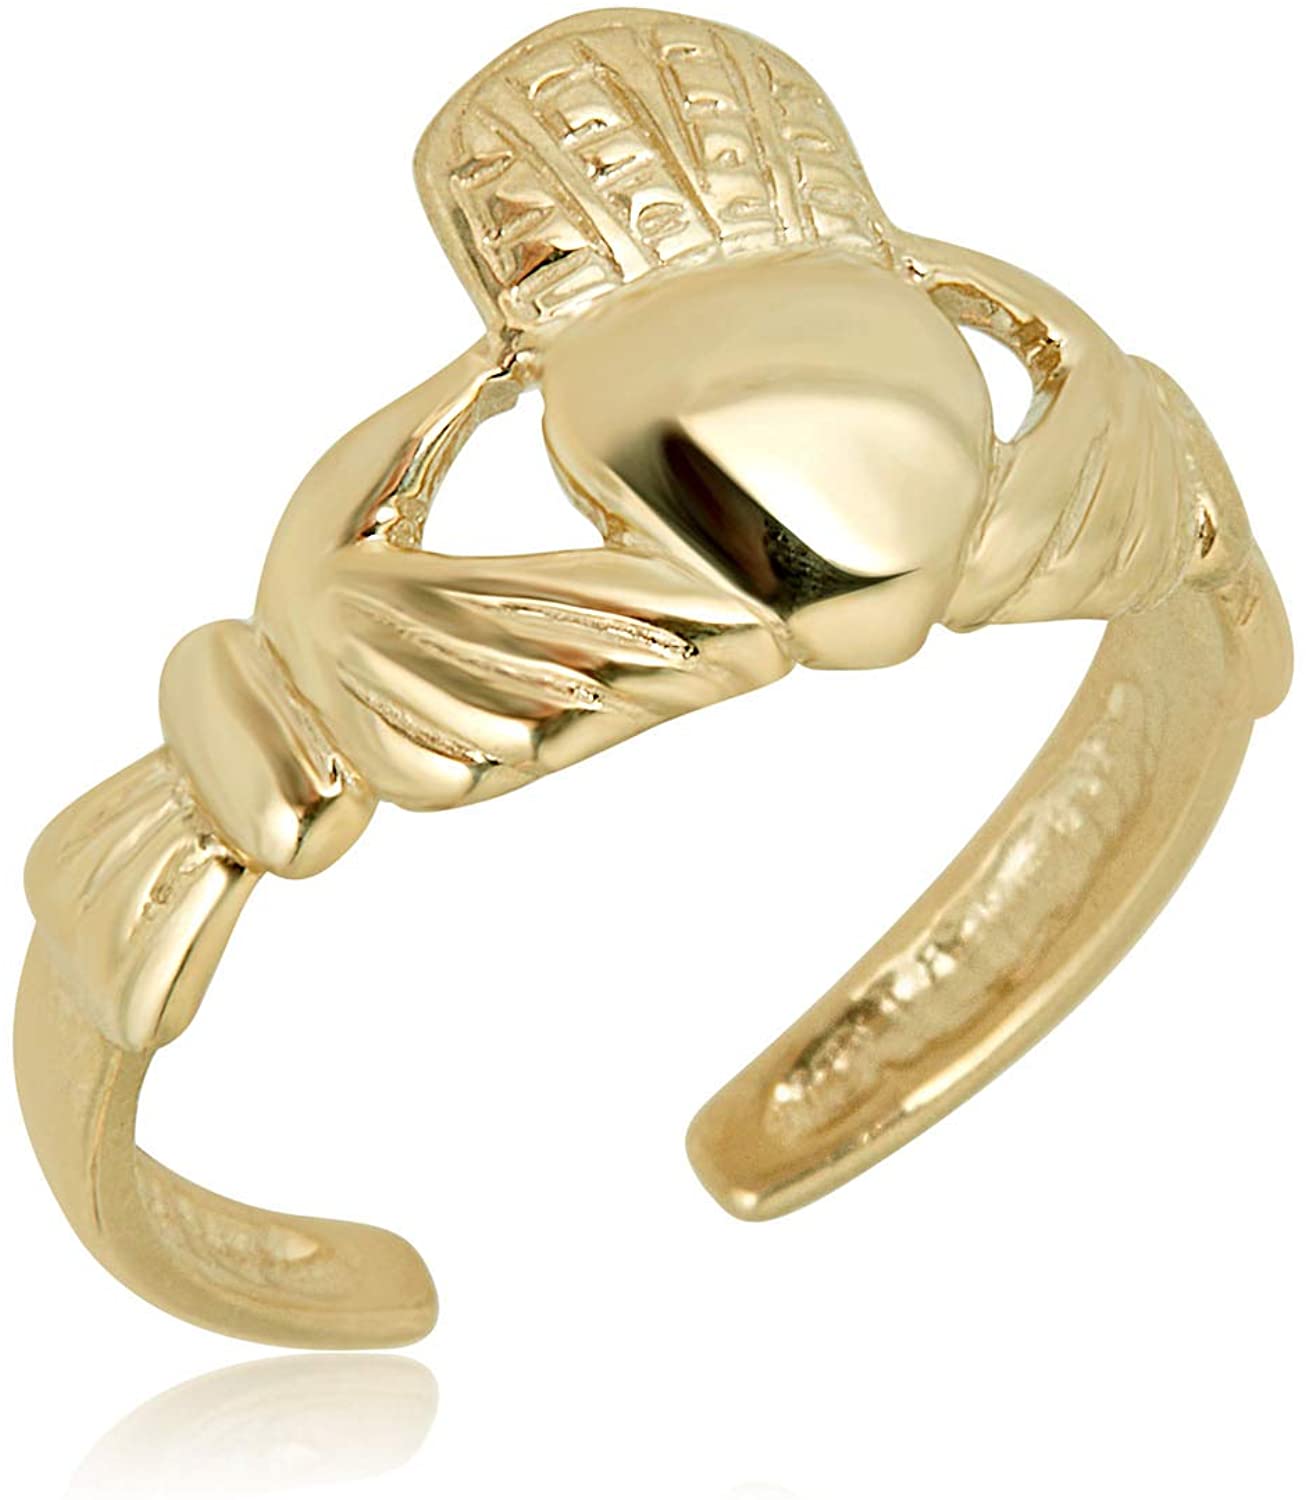 NEW Adjustable Claddagh Toe Ring 14K Yellow Gold  